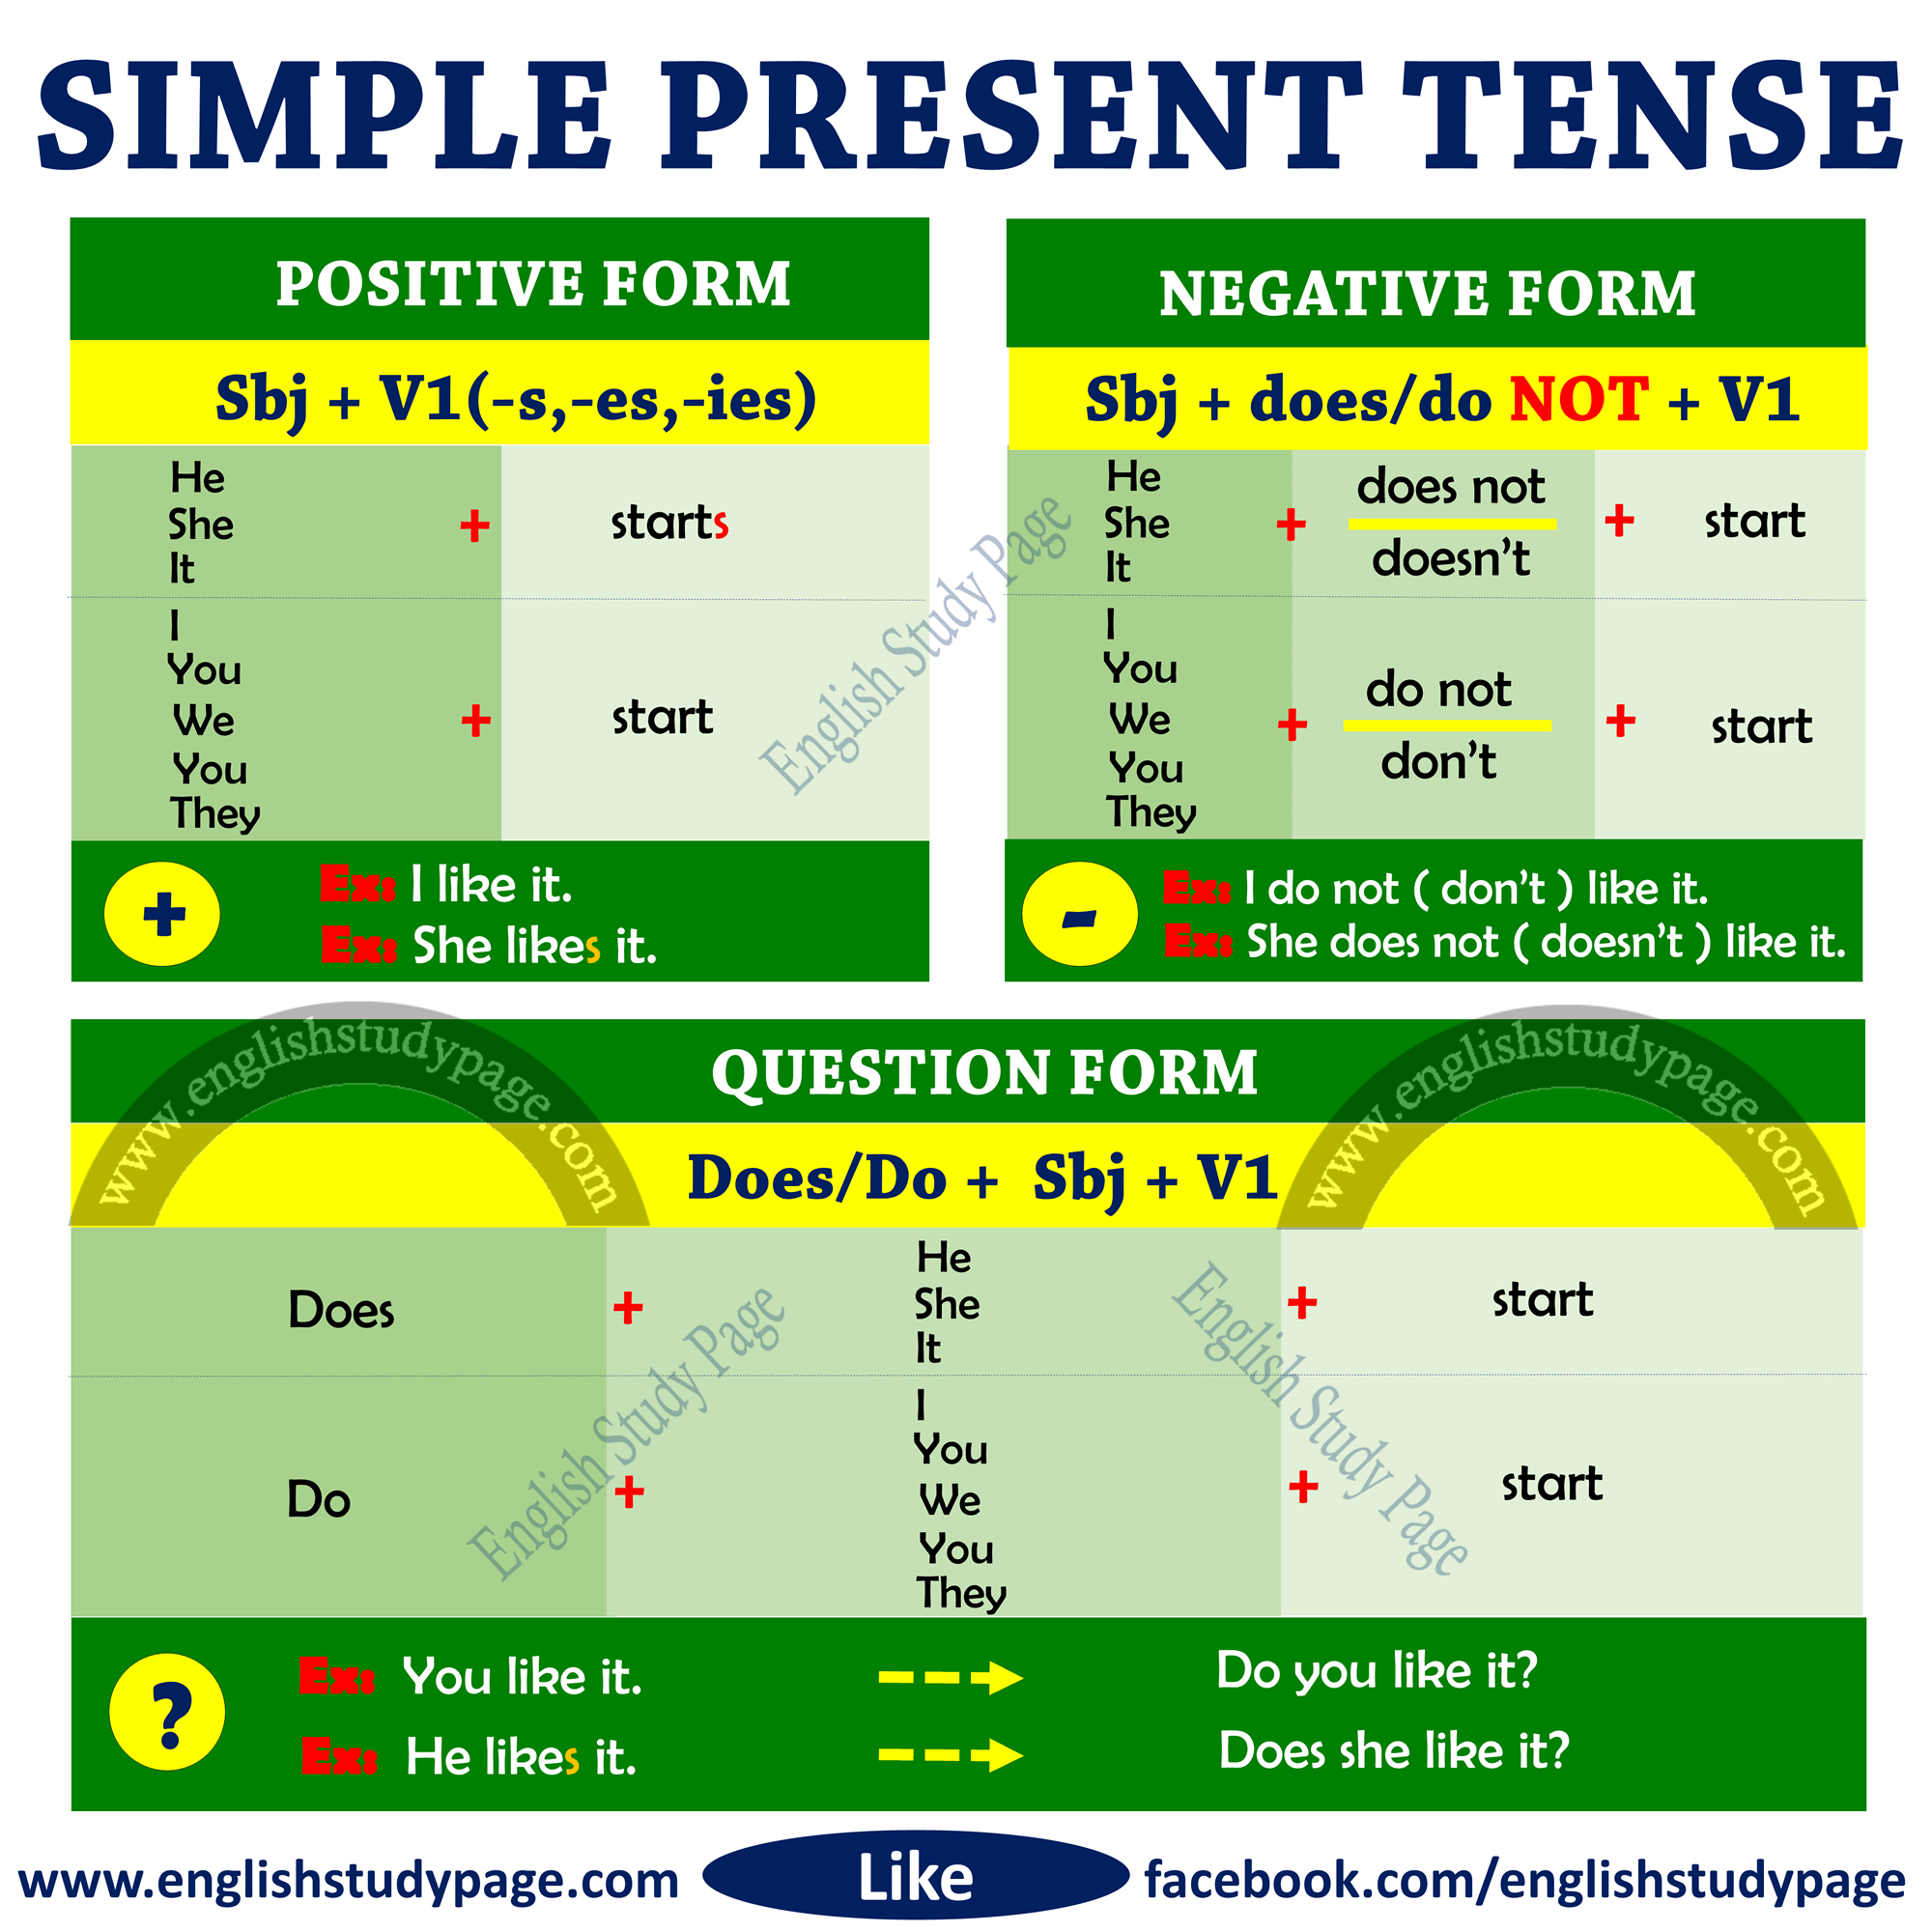 structure-of-simple-present-tense-english-study-page